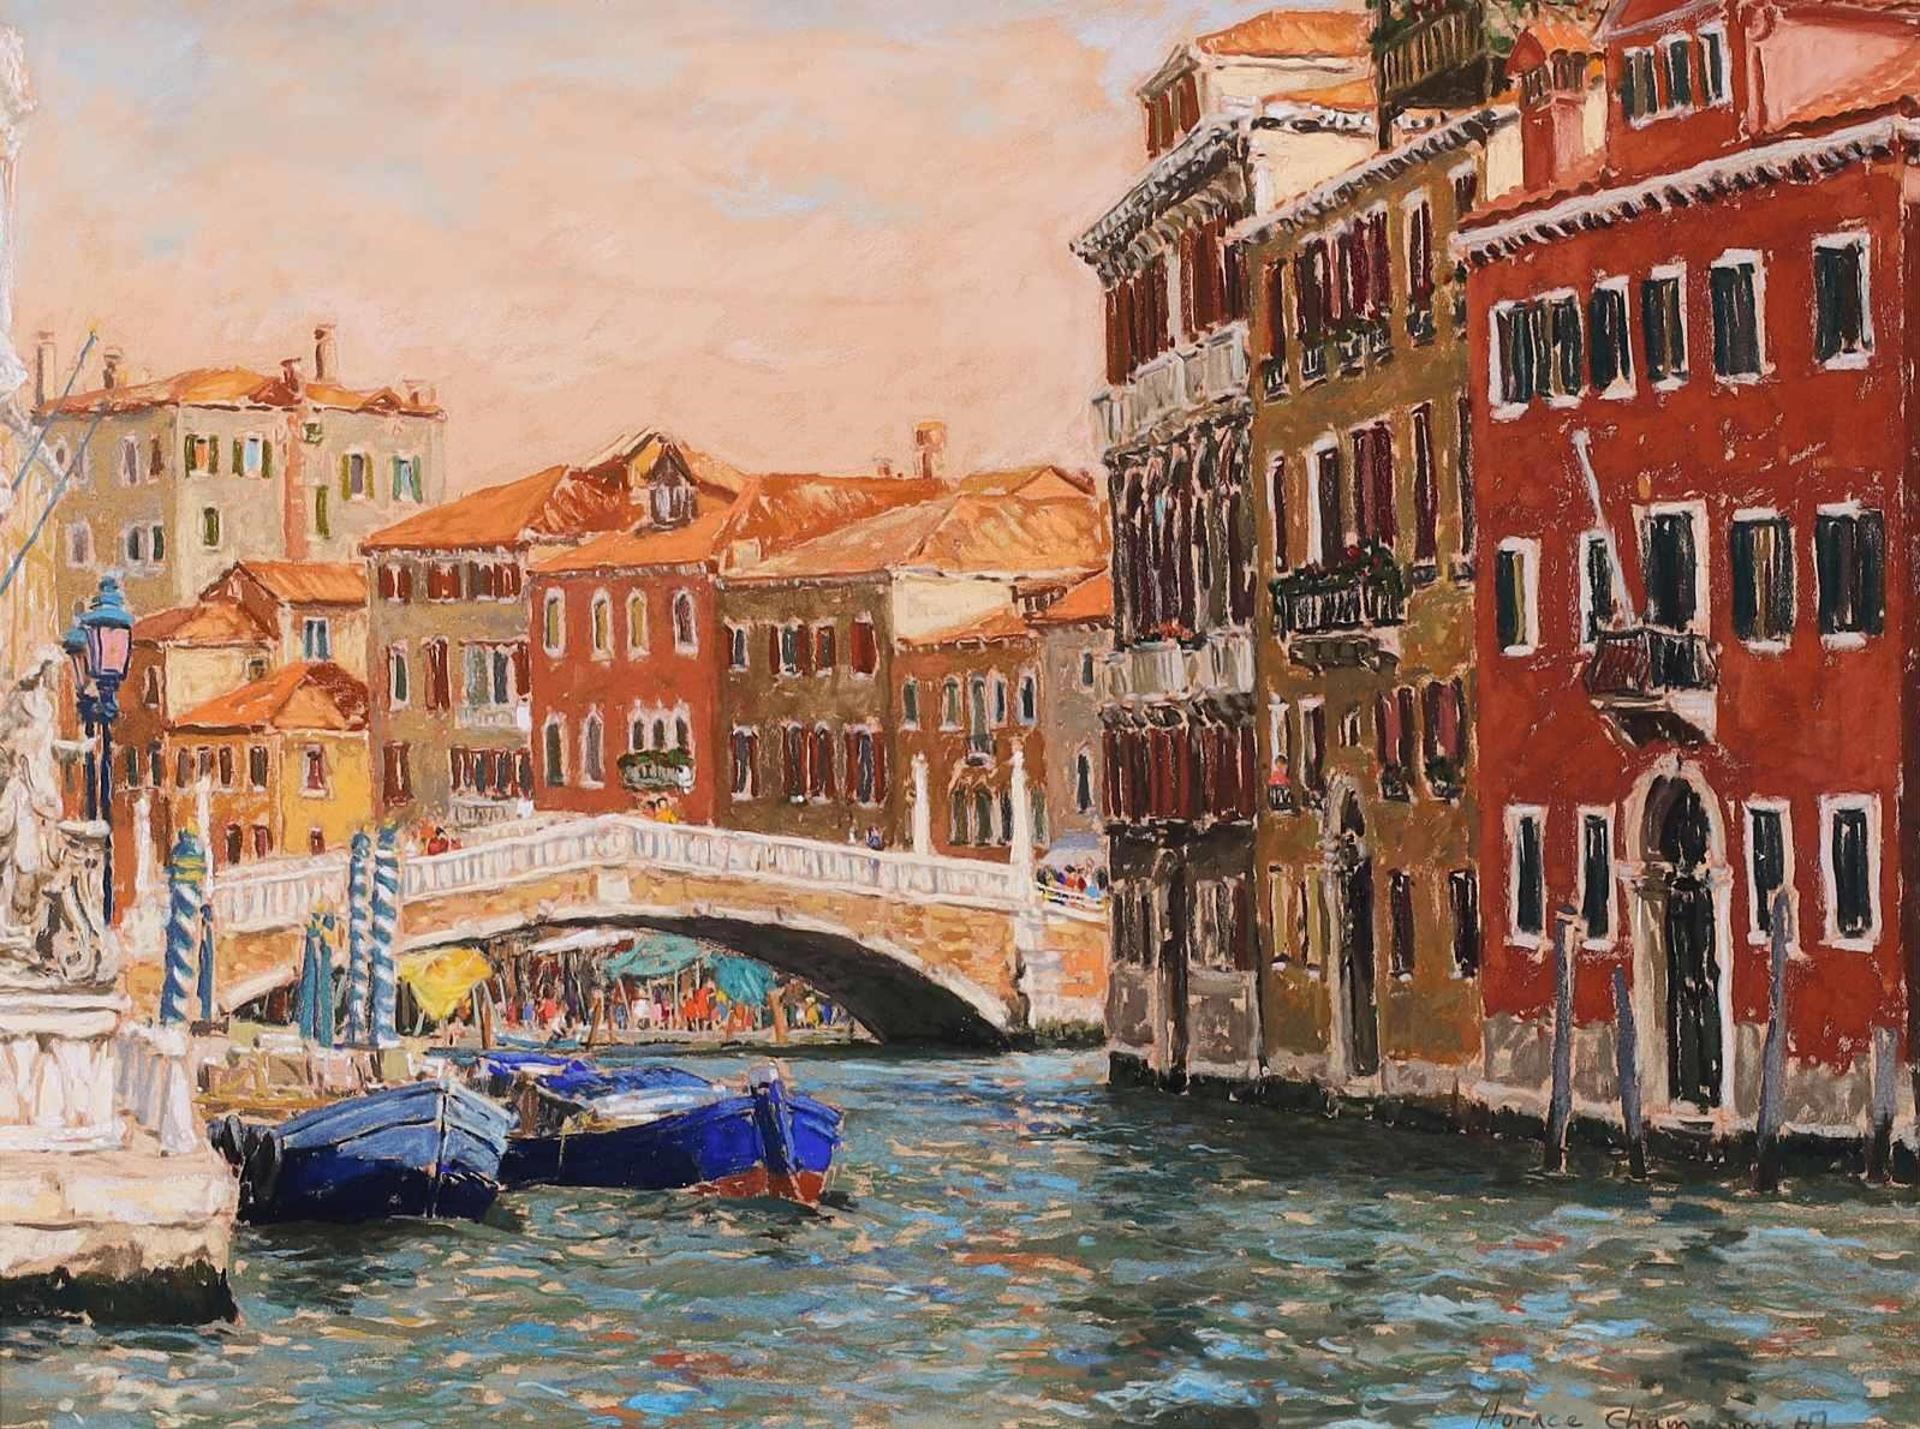 Horace Champagne (1937) - Morning Market In Venice (Pont D. Guglie, Canal Di Cannaregio); 1994